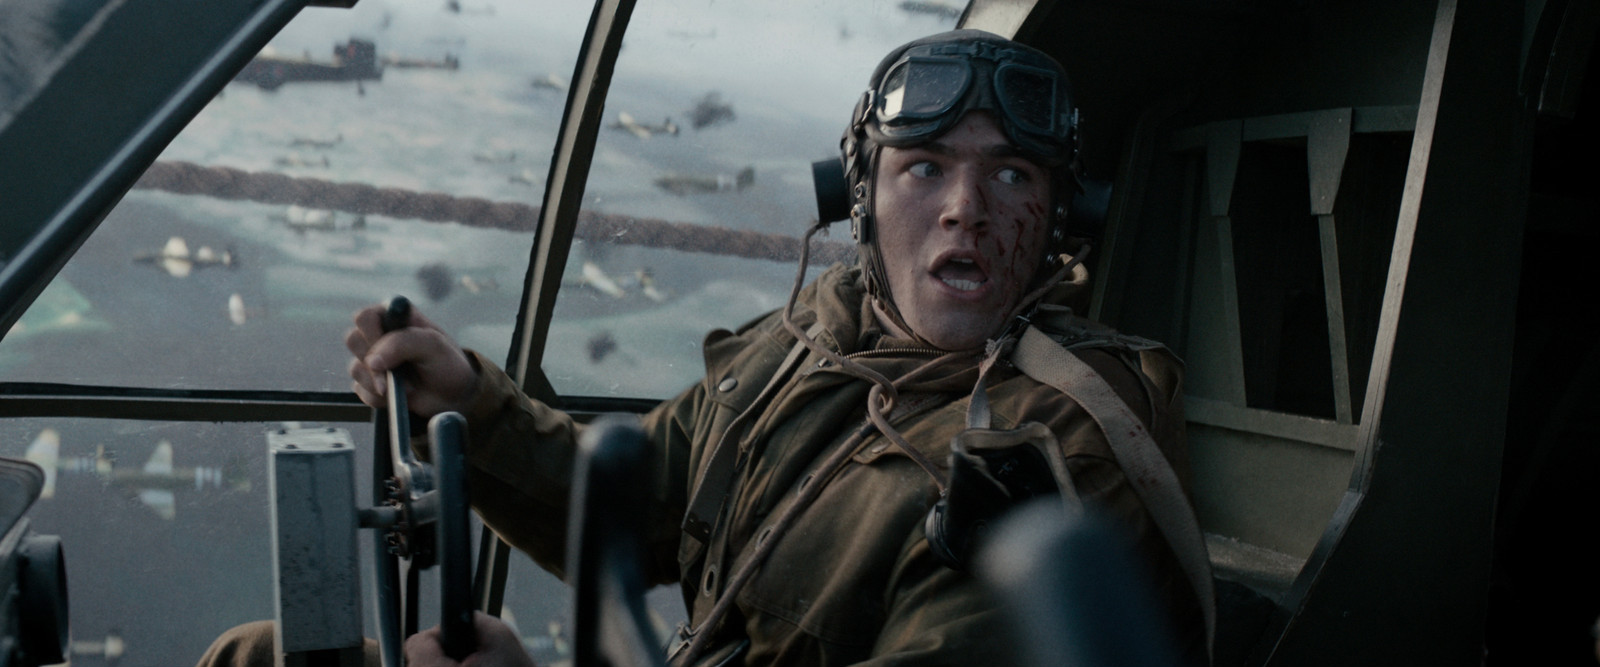 Still from the film De Slag om de Schelde/The Forgotten Battle. William is in his seat in the cockpit of a WW2 fighter plane. He's looking behind him with shock, blood on his face. Through the window you can see more planes.